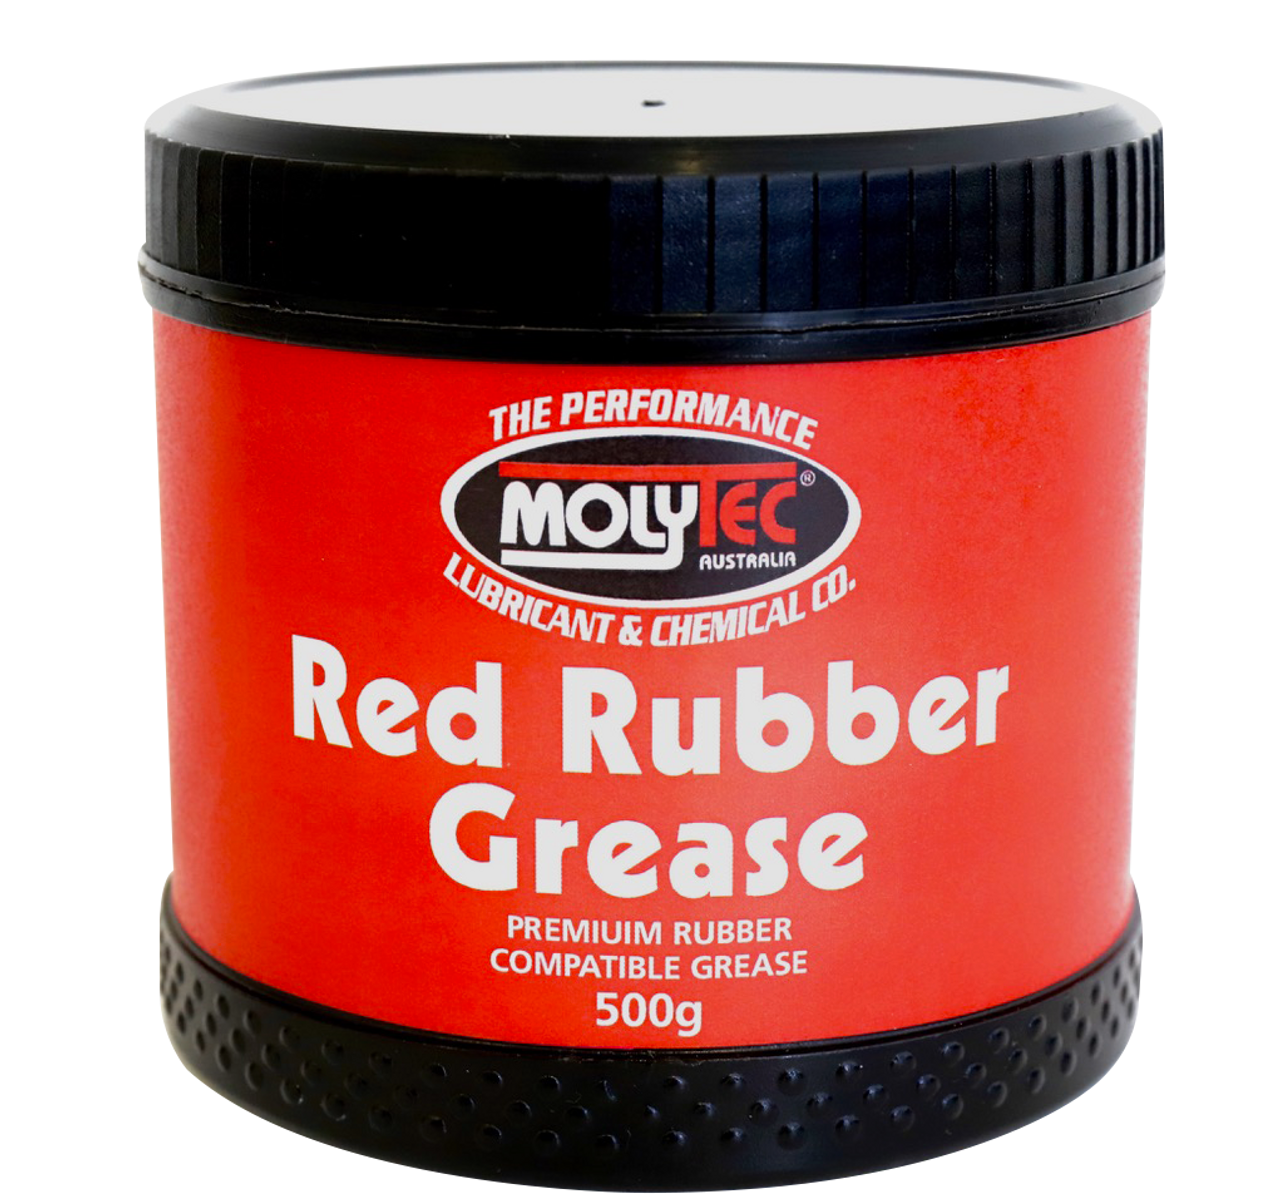 Red Rubber Grease 500G Tub